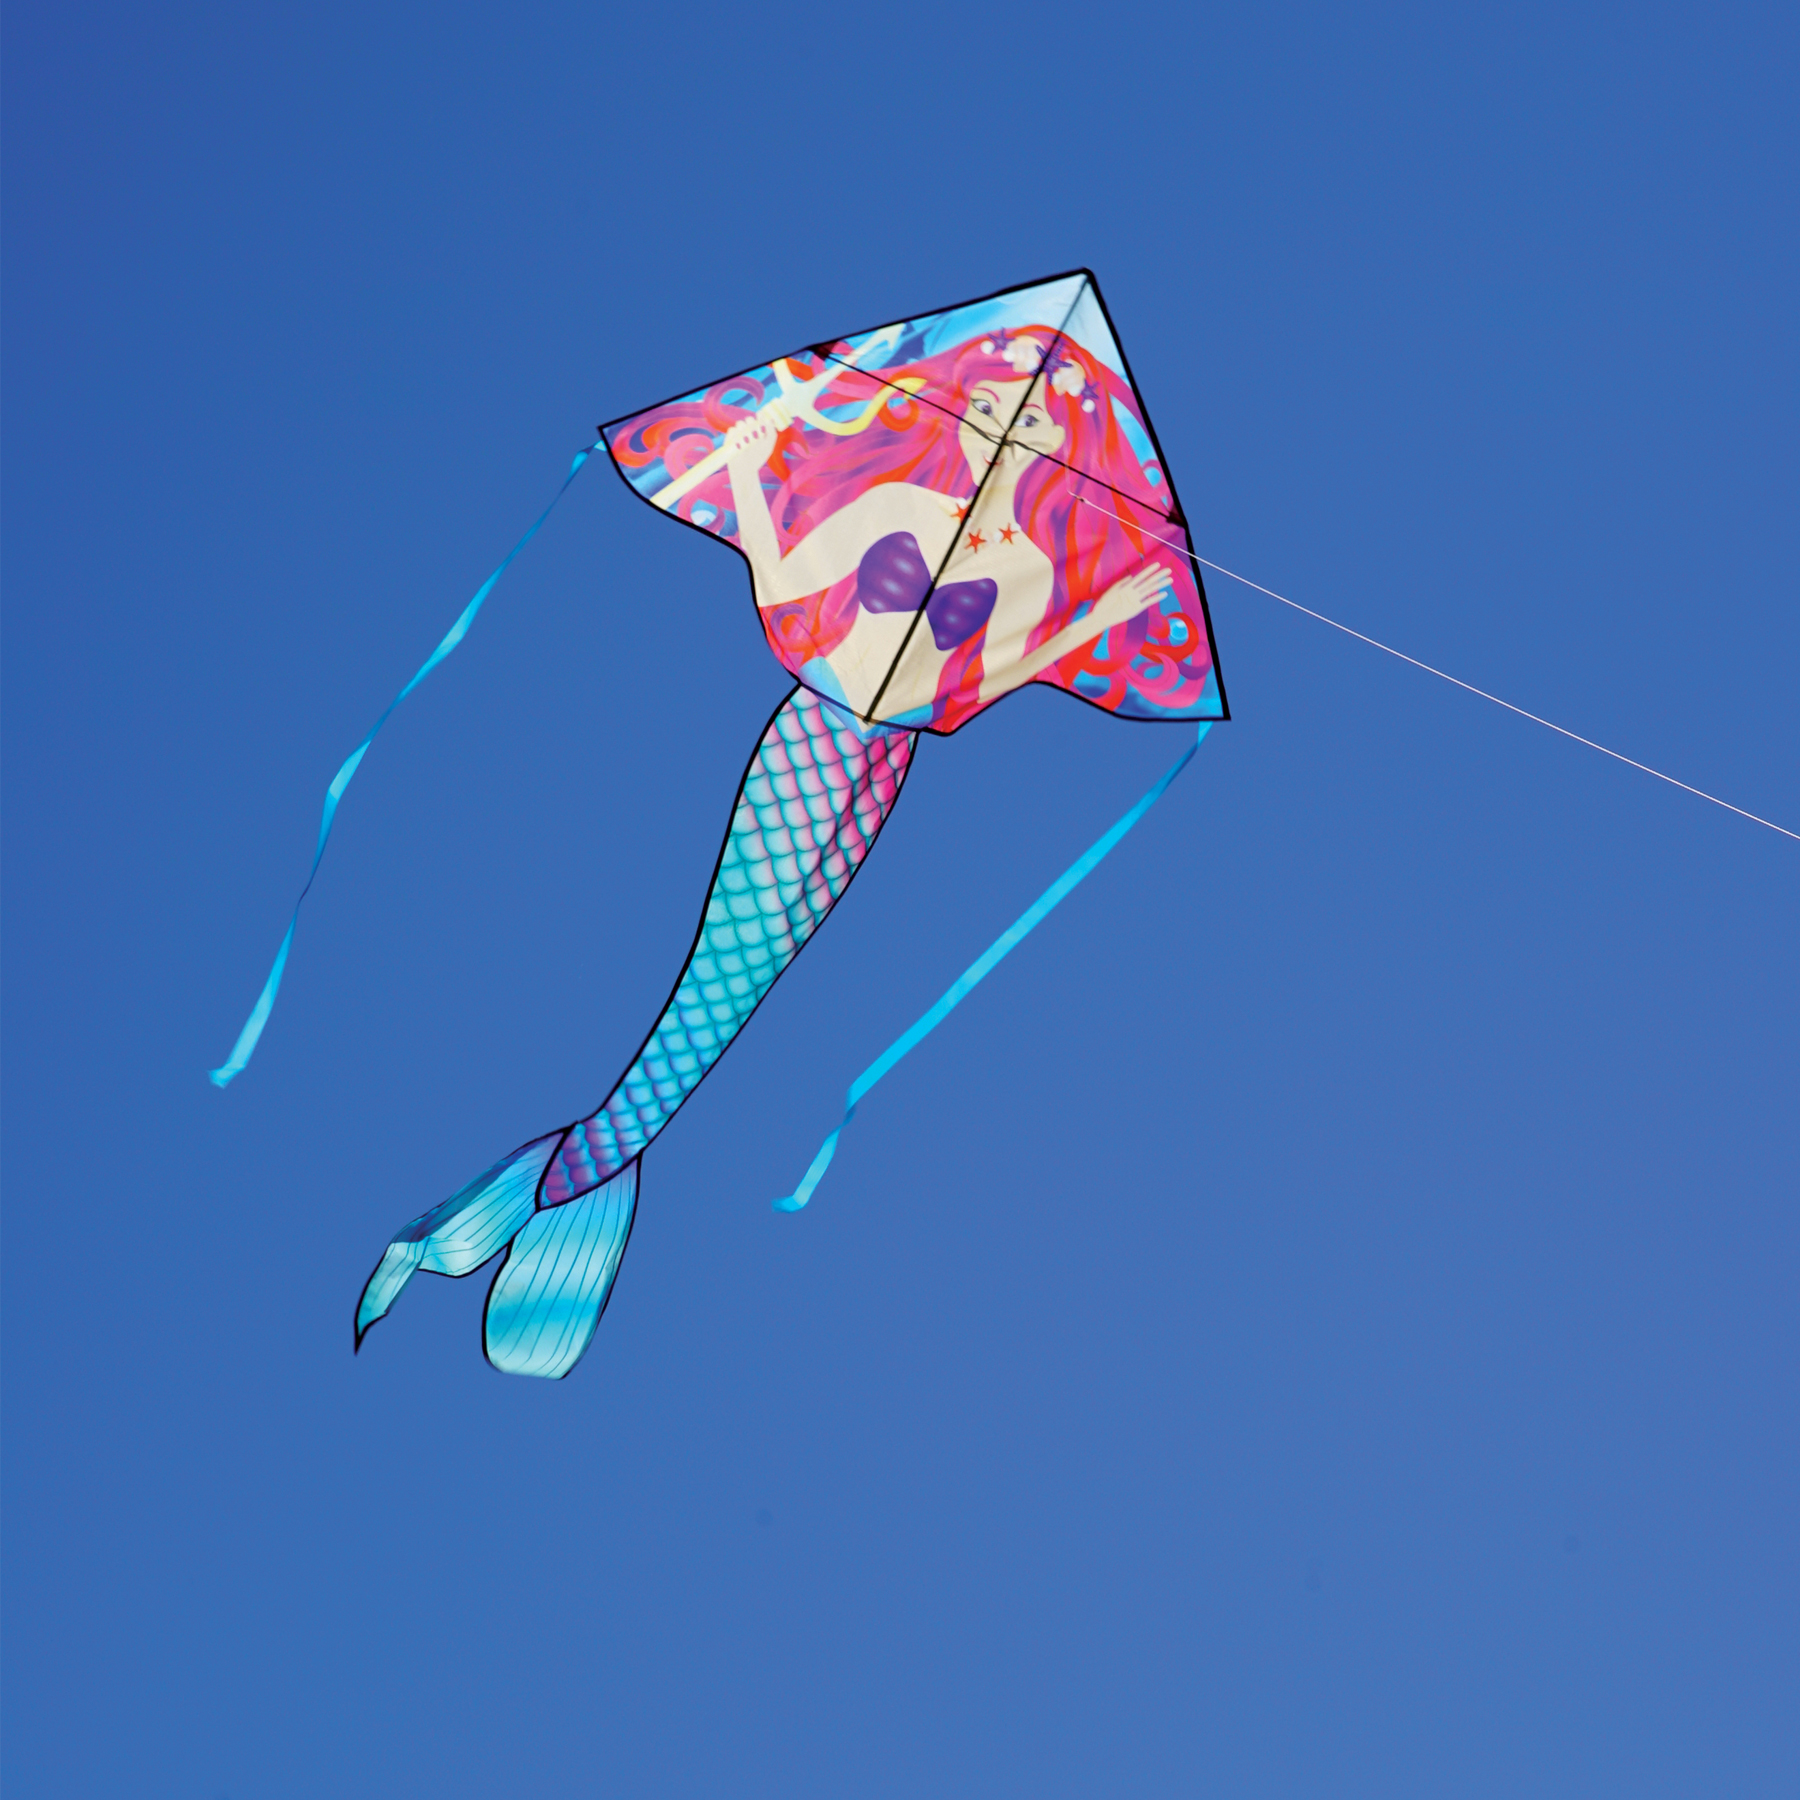 In the Breeze 3272 — Mermaid 45-inch Fly-Hi Kite - Fun, Easy Flying Kite for All Ages - image 2 of 2